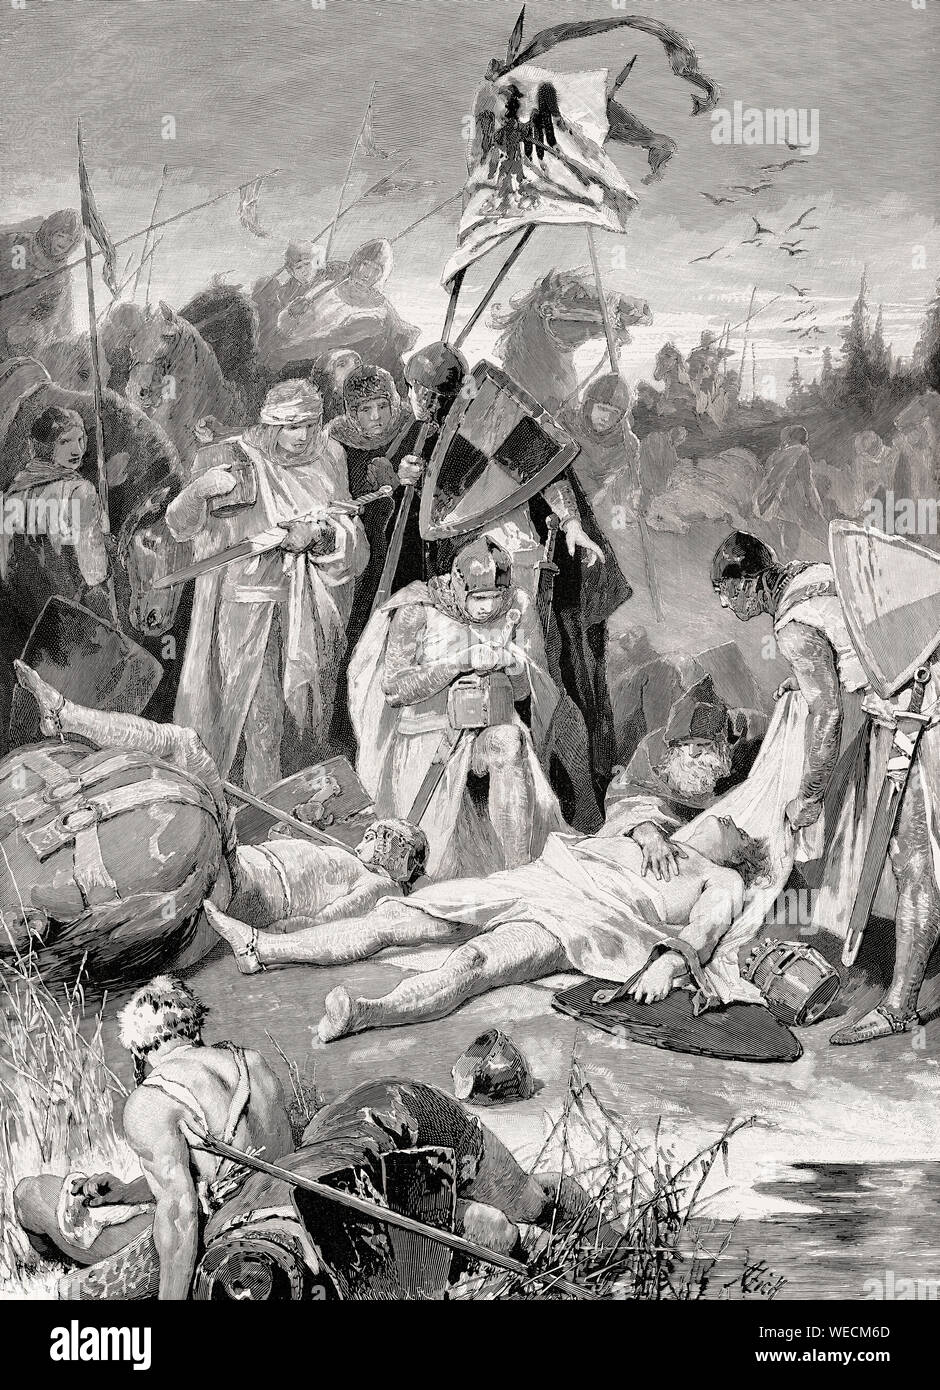 Rudolph of Habsburg at the dead body of King Ottokar Bohemia, Battle on the Marchfeld, 26 August 1278 Stock Photo